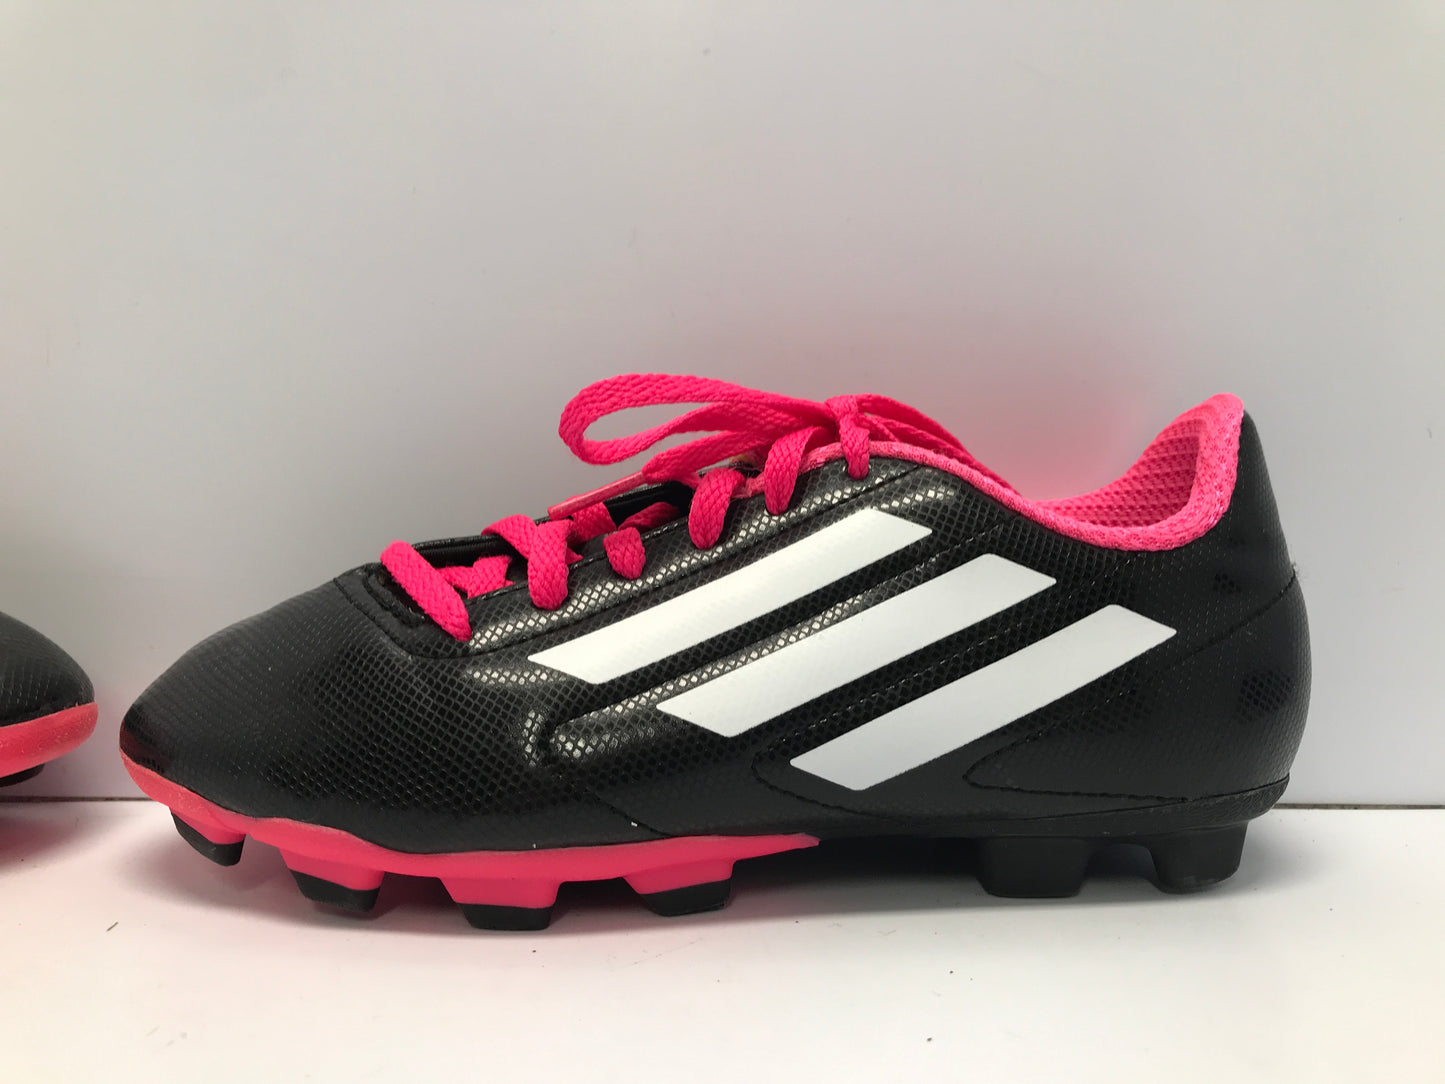 Soccer Shoes Cleats Child Size 2 Adidas Black Fushia Pink Excellent